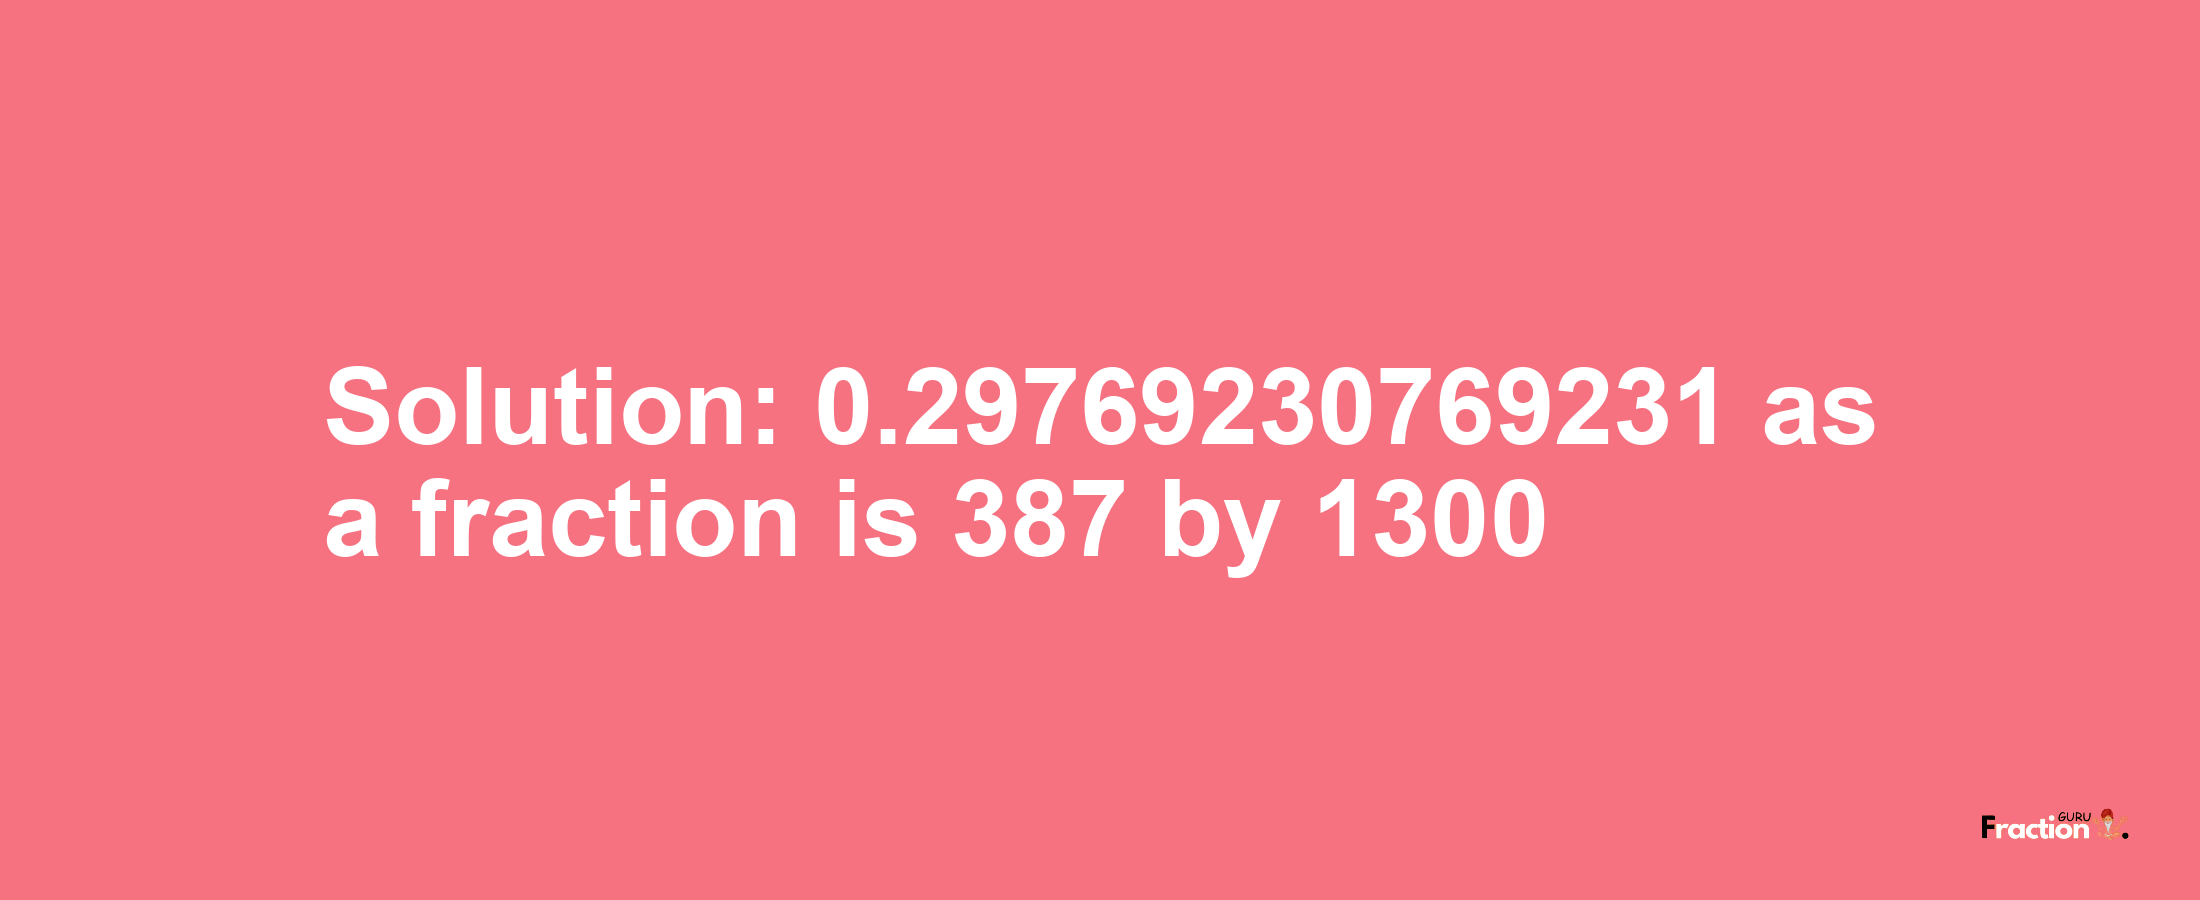 Solution:0.29769230769231 as a fraction is 387/1300